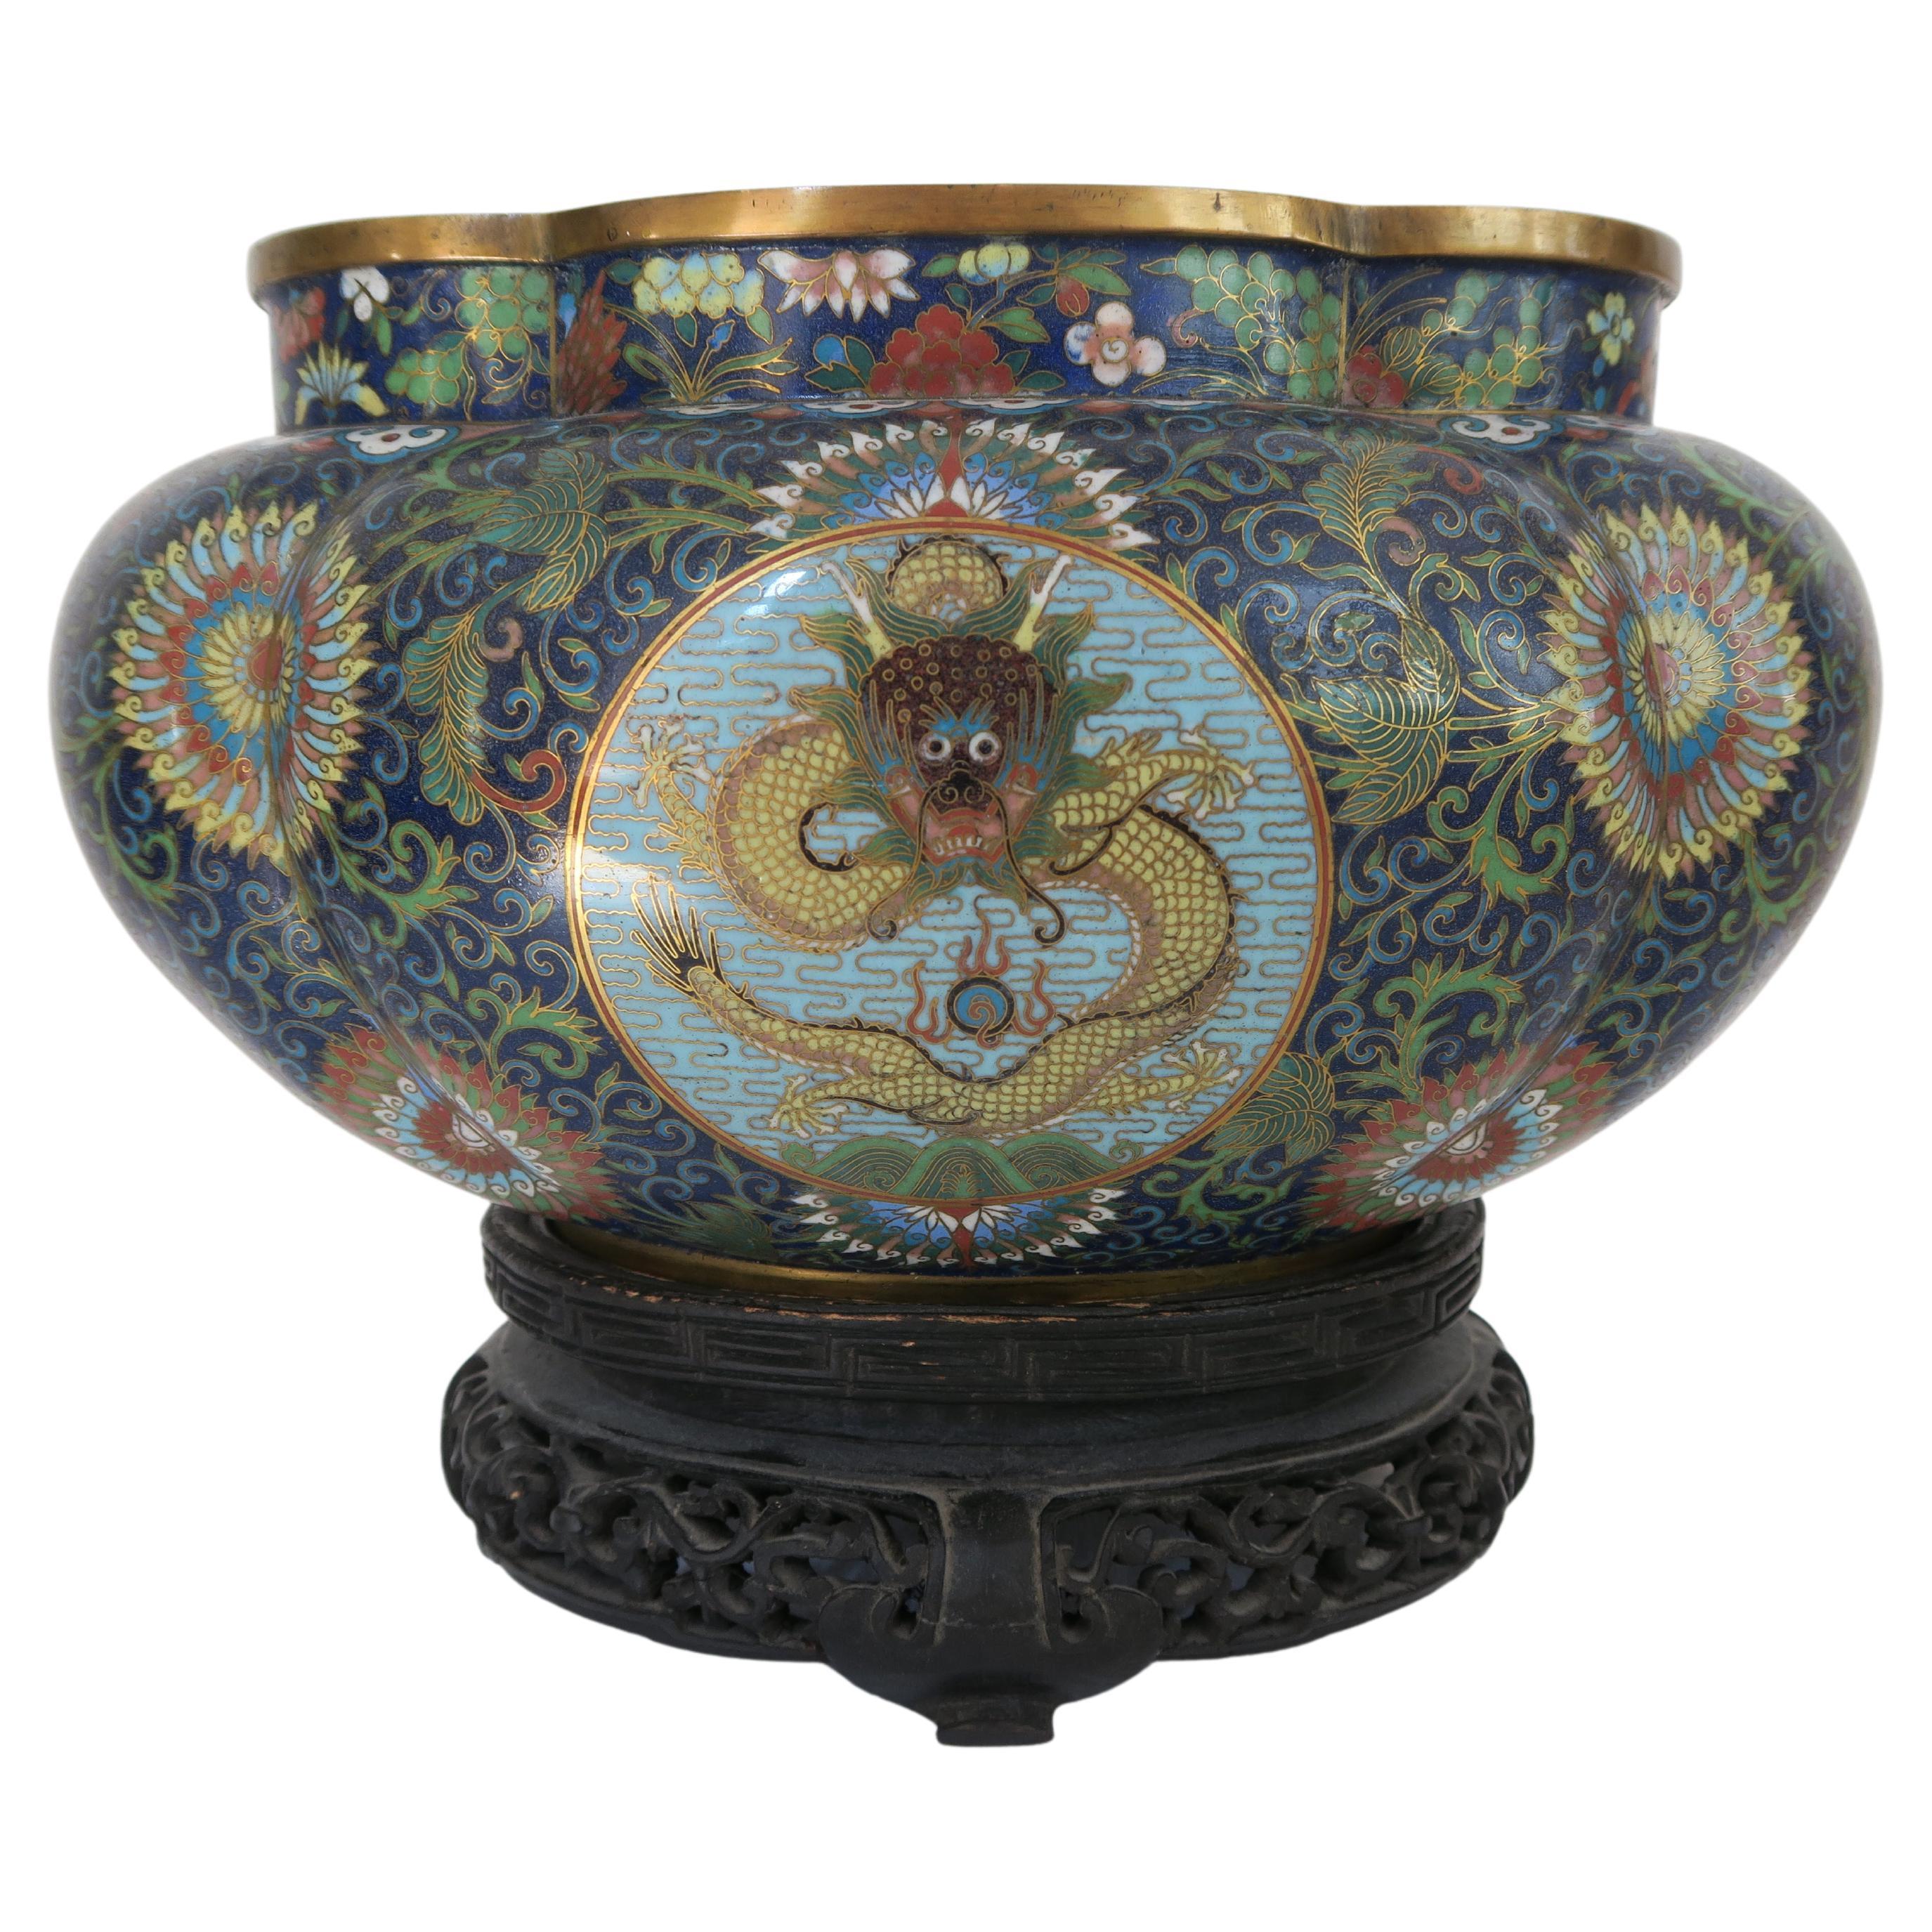 Chinese Bronze-Enamel Cloisonné Jardinere, Qing Dynasty, Jiaqing-Period